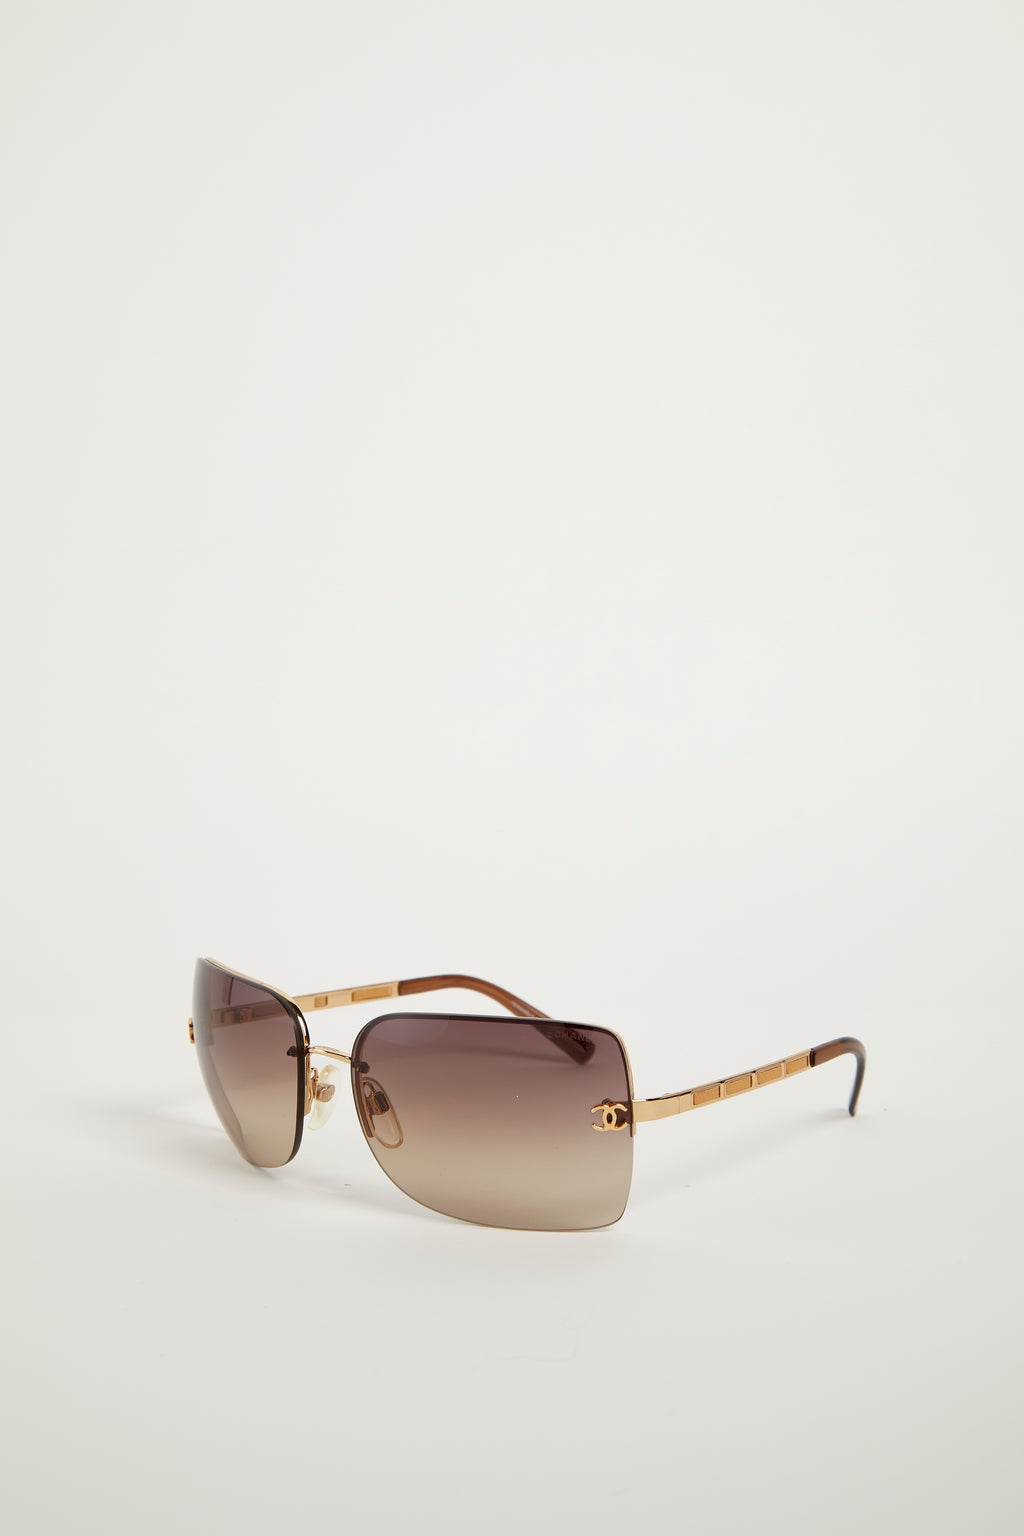 Vintage Chanel Brown Sunglasses with Leather Detail